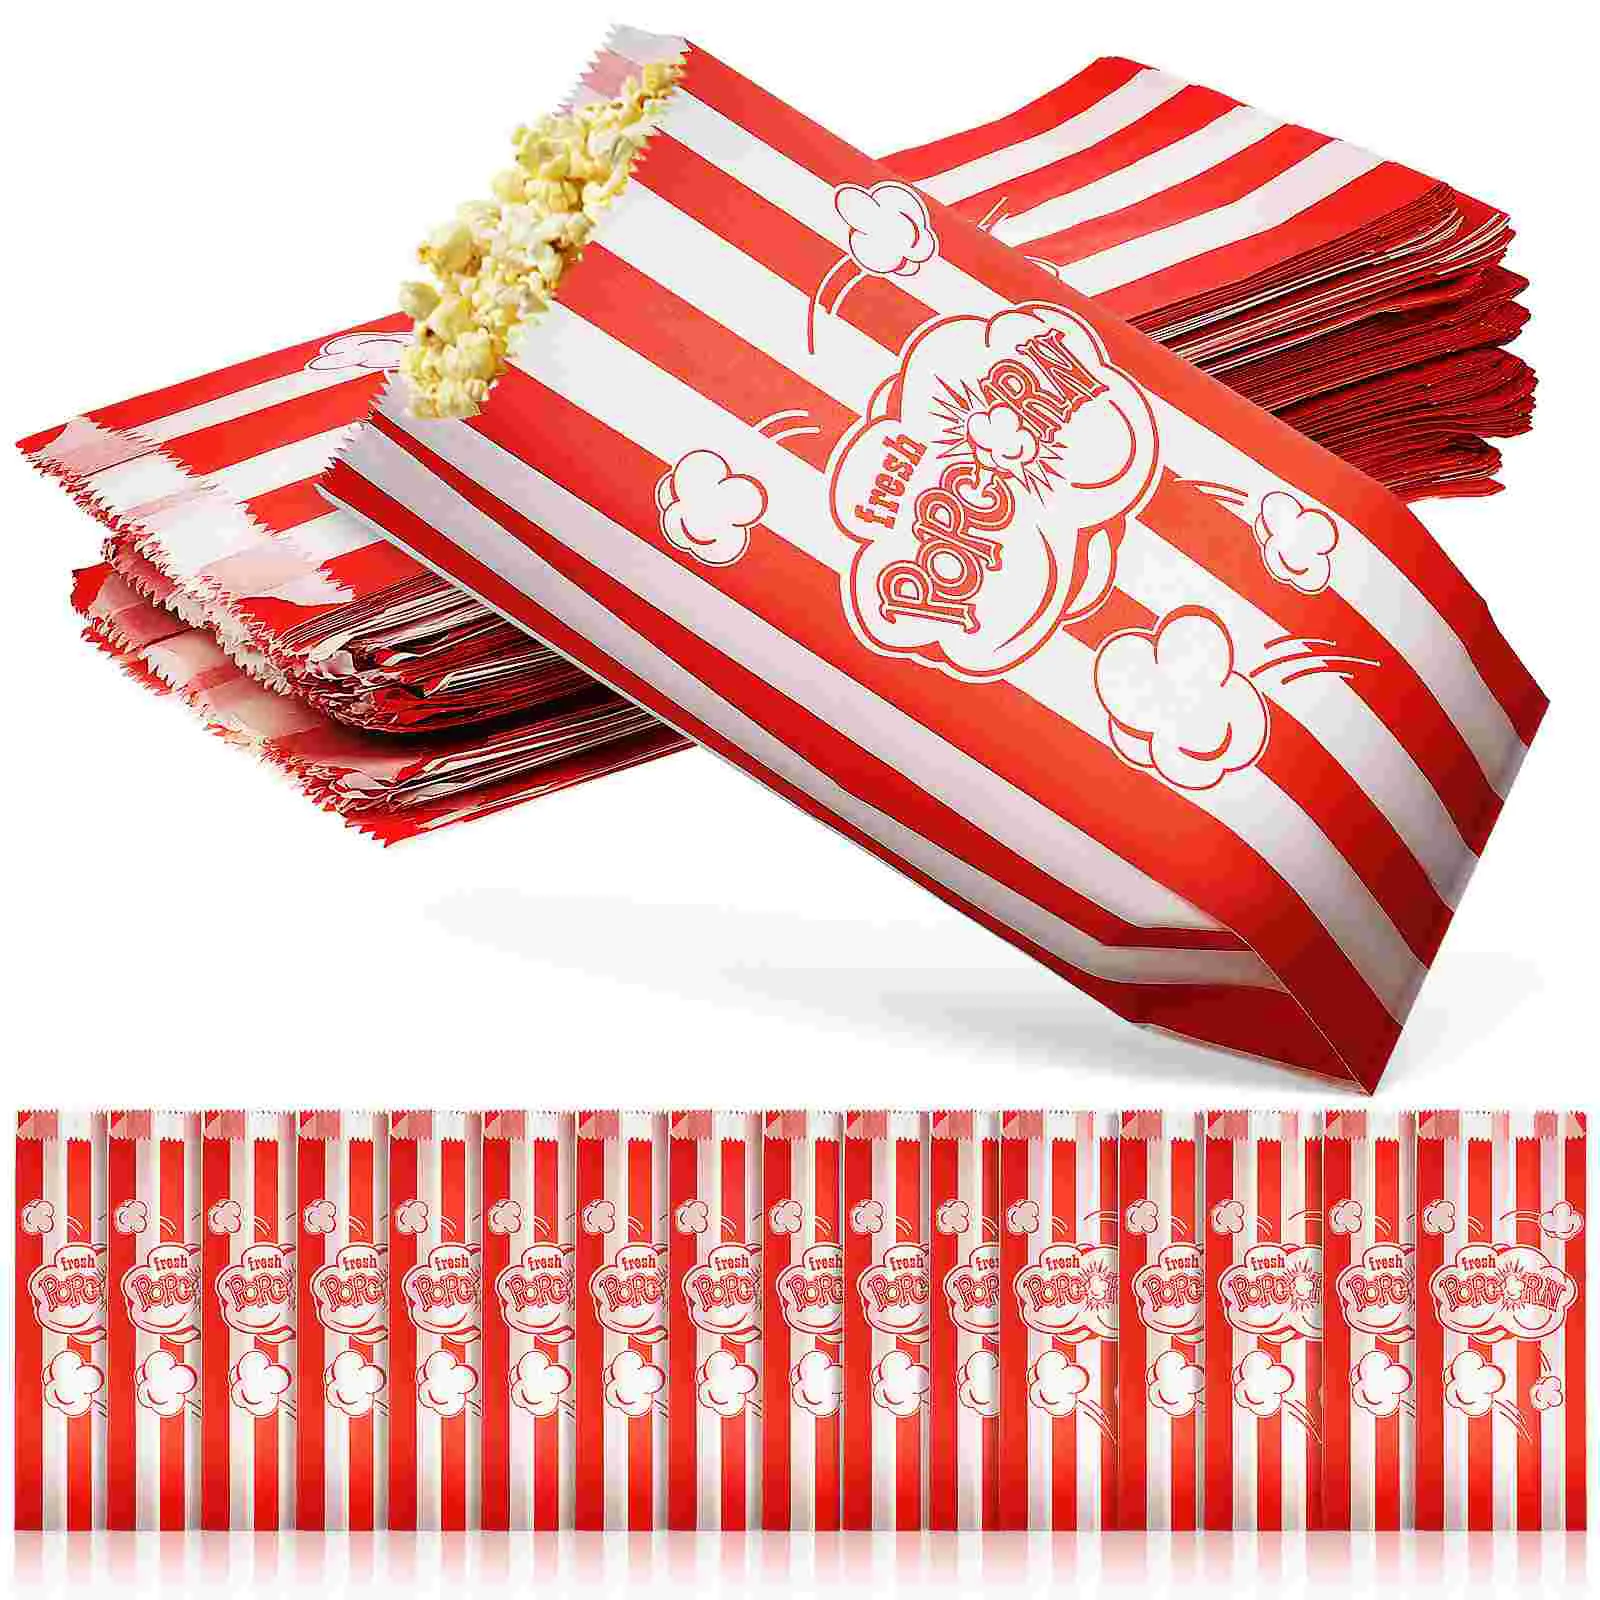 

100 Pcs Popcorn Bags Paper Letter Pattern Stripe Printed Treats Bags for Popcorn Cookies Candy Box